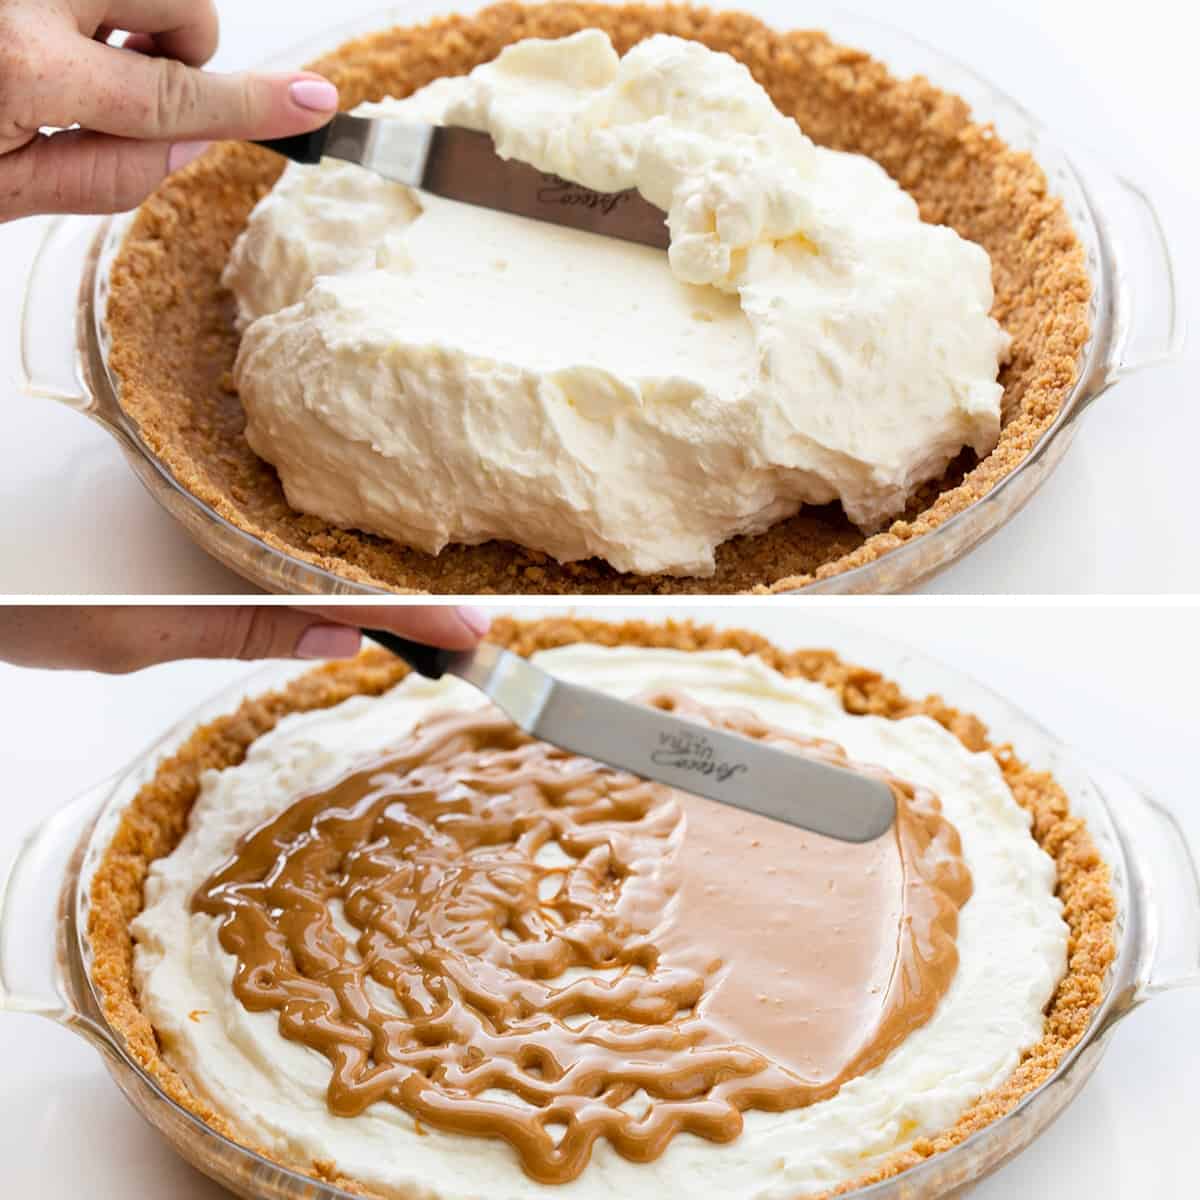 Steps for Adding Marshmallow Filling and then Peanut Butter to Pie Crust to Make Fluffernutter Pie.